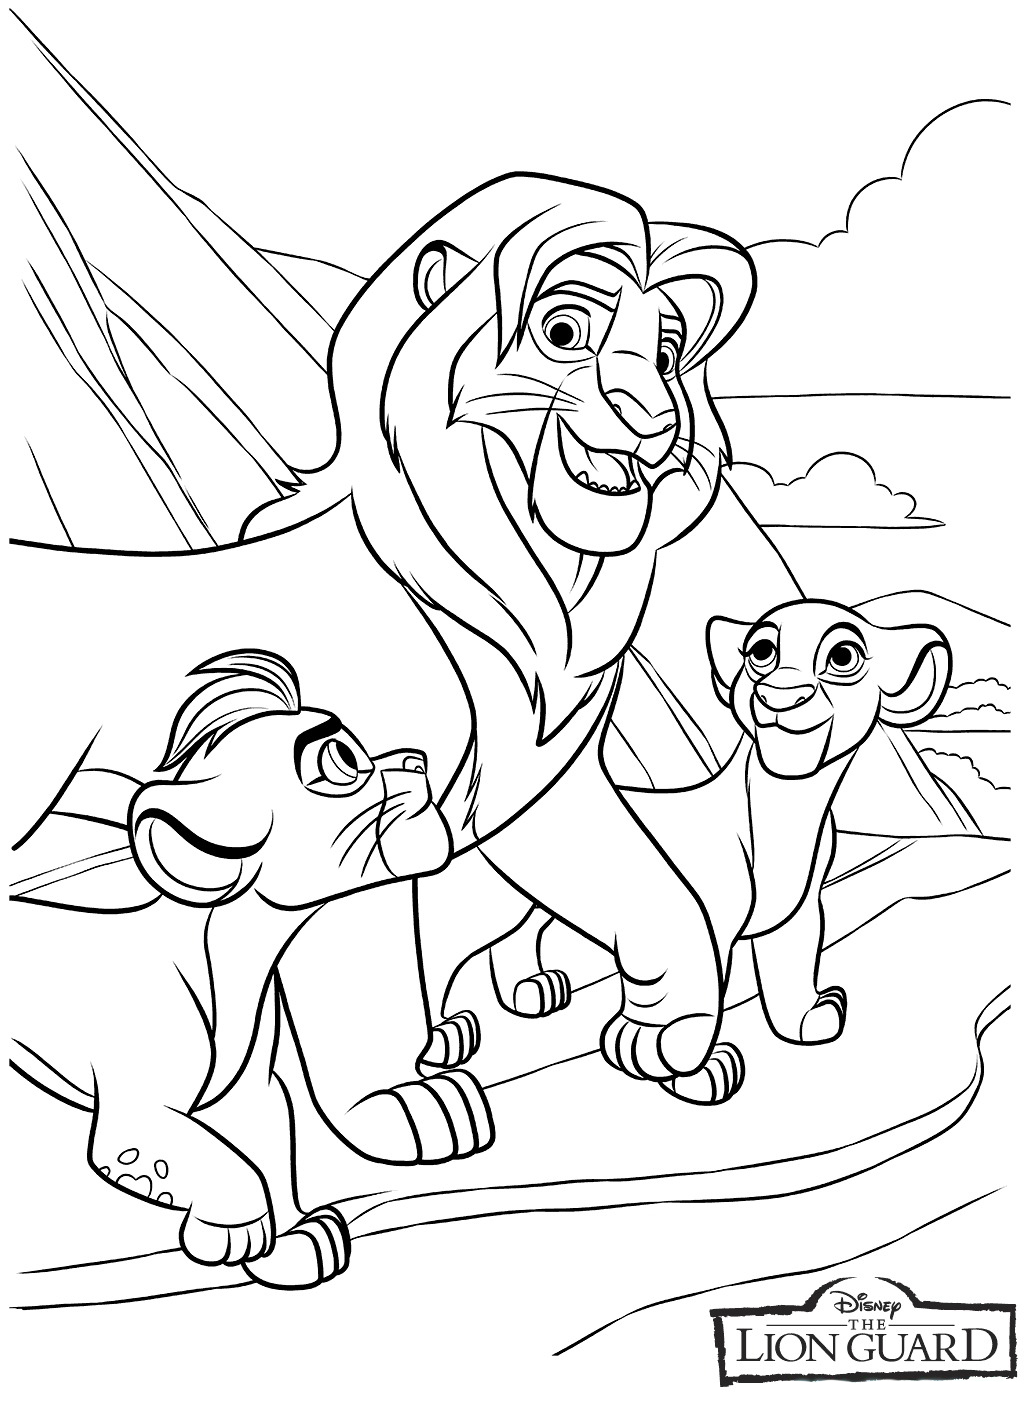 Download The Lion Guard Coloring Pages - Coloring Home